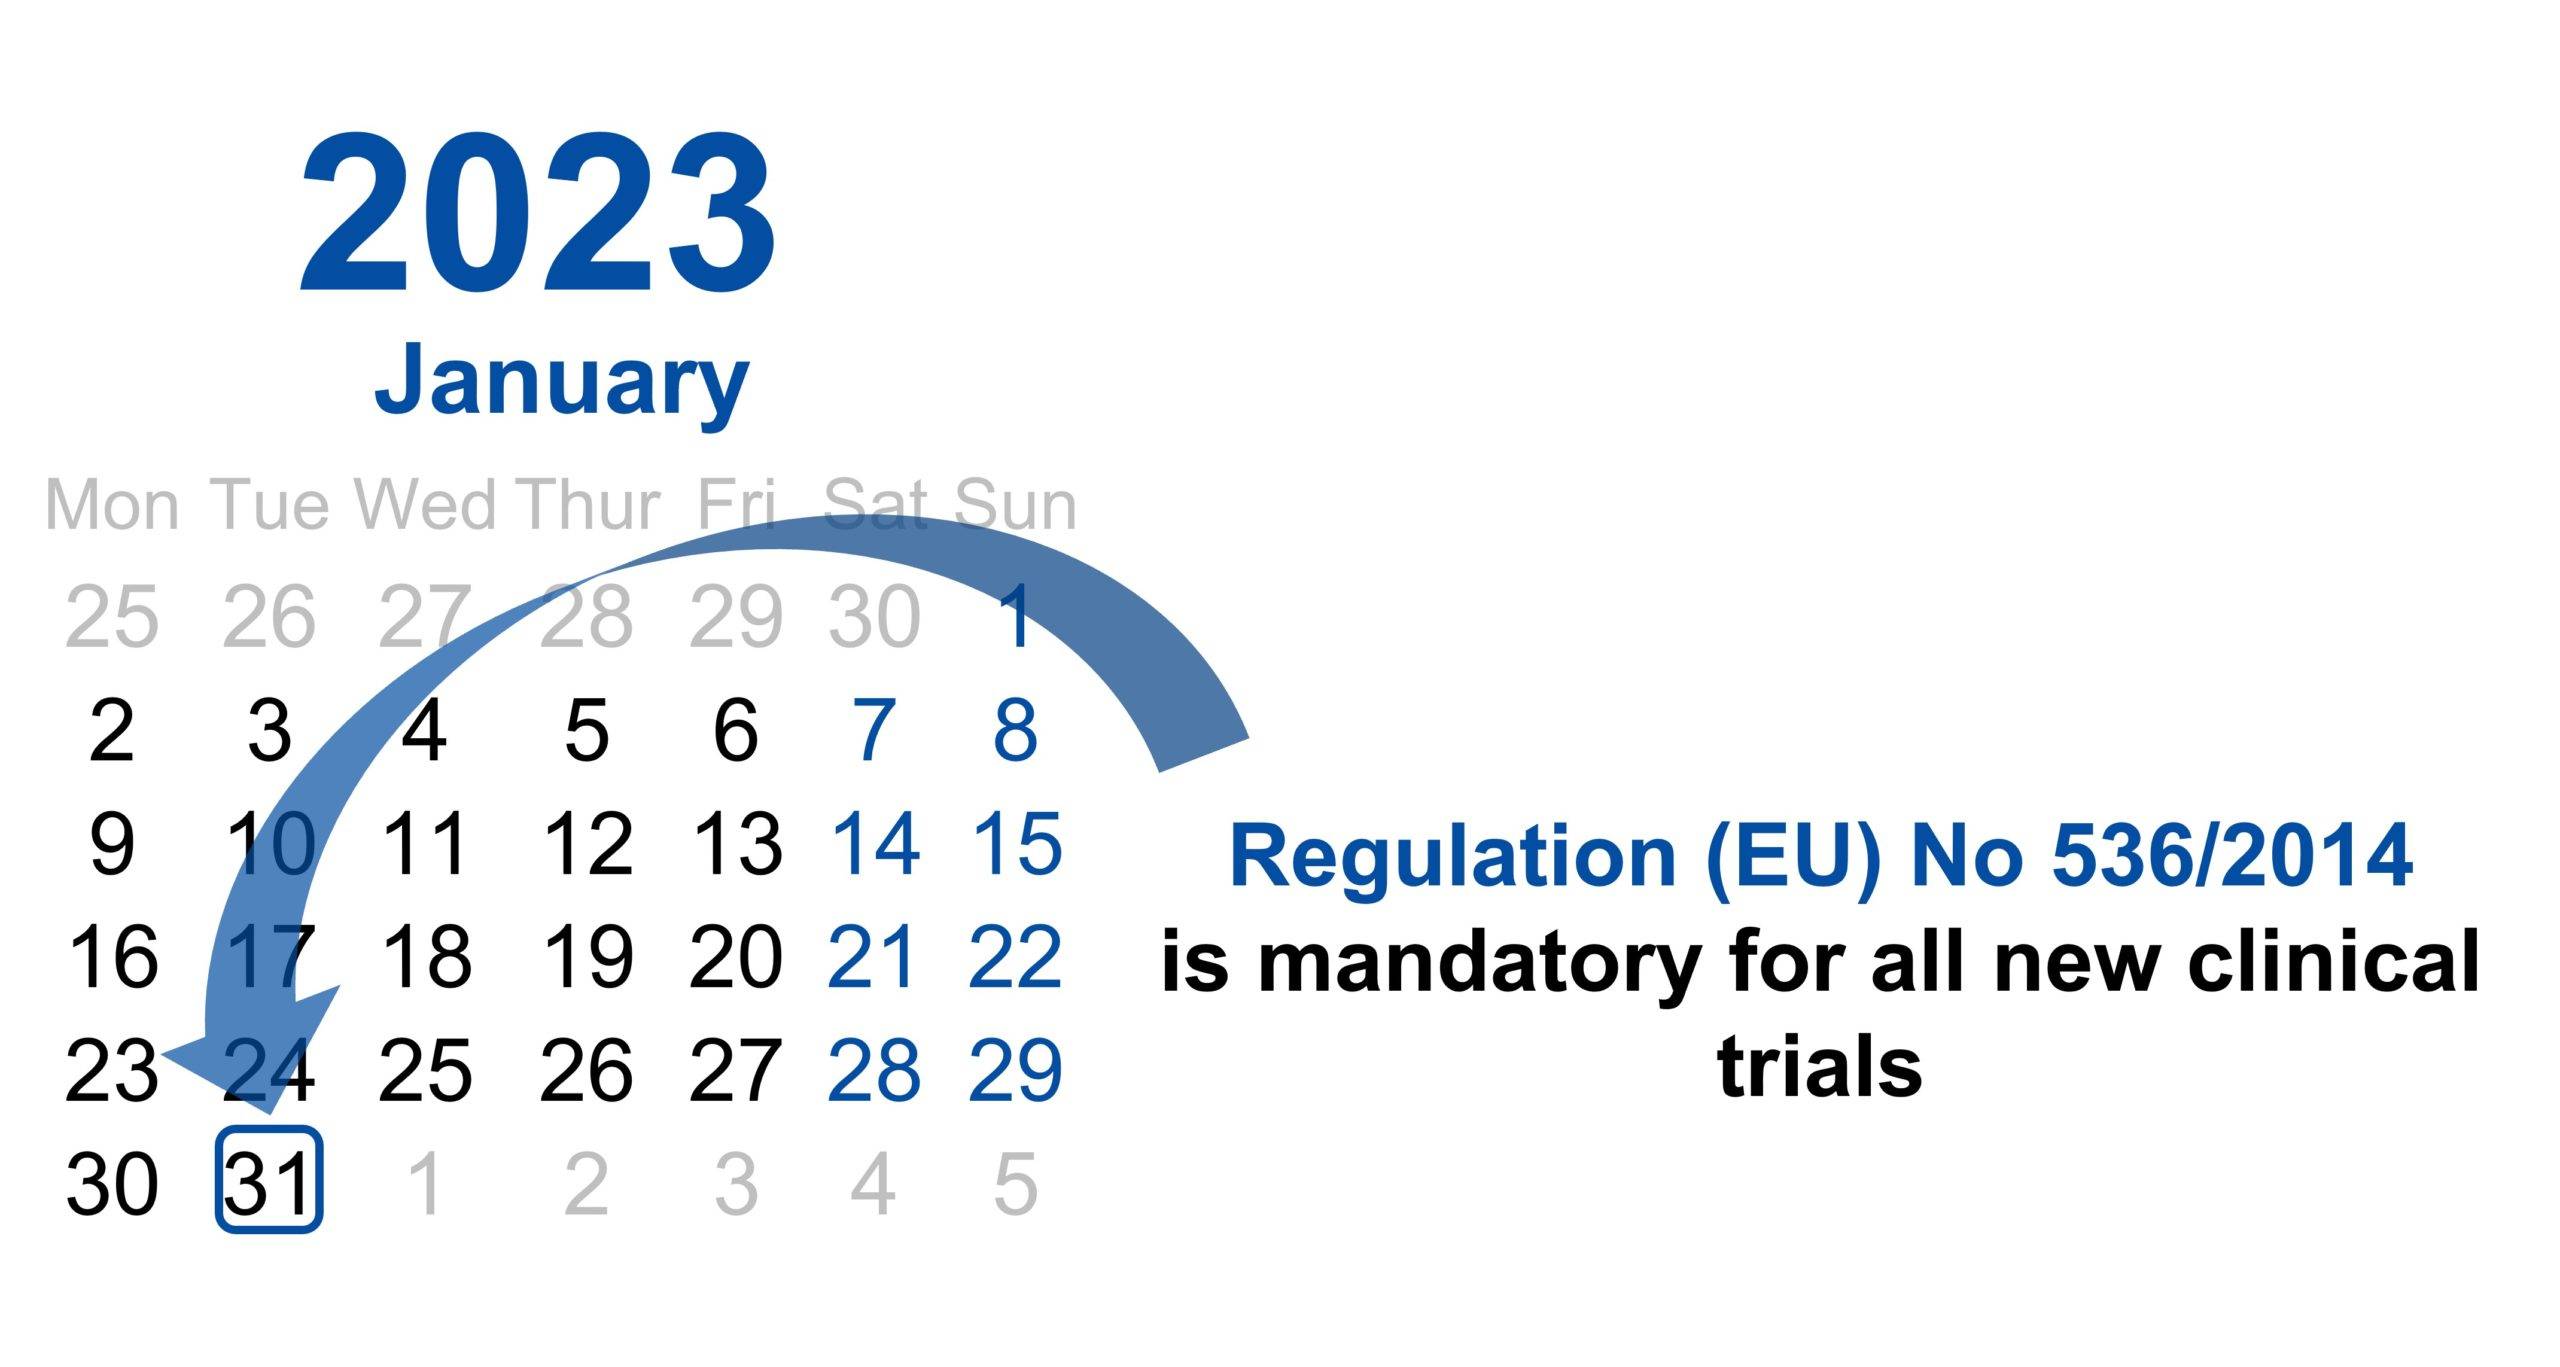 Calendar marking the date of the 31st of January 2023 when Regulation (EU) No 536/2014 will be mandatory for all initial clinical trial applications